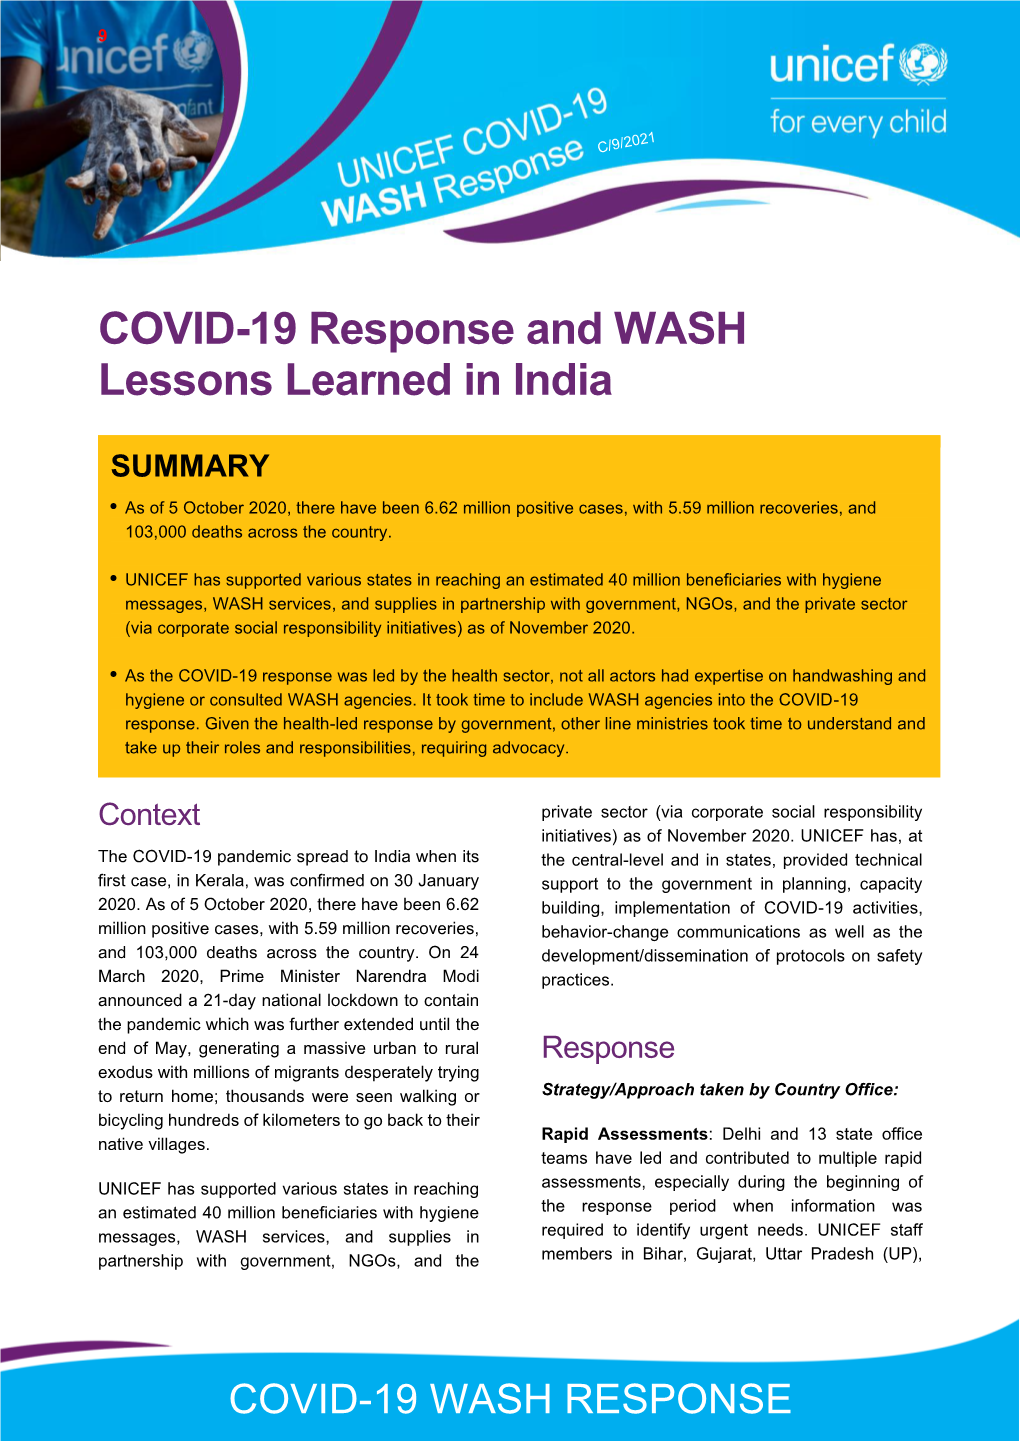 COVID-19 Response and WASH Lessons Learned in India